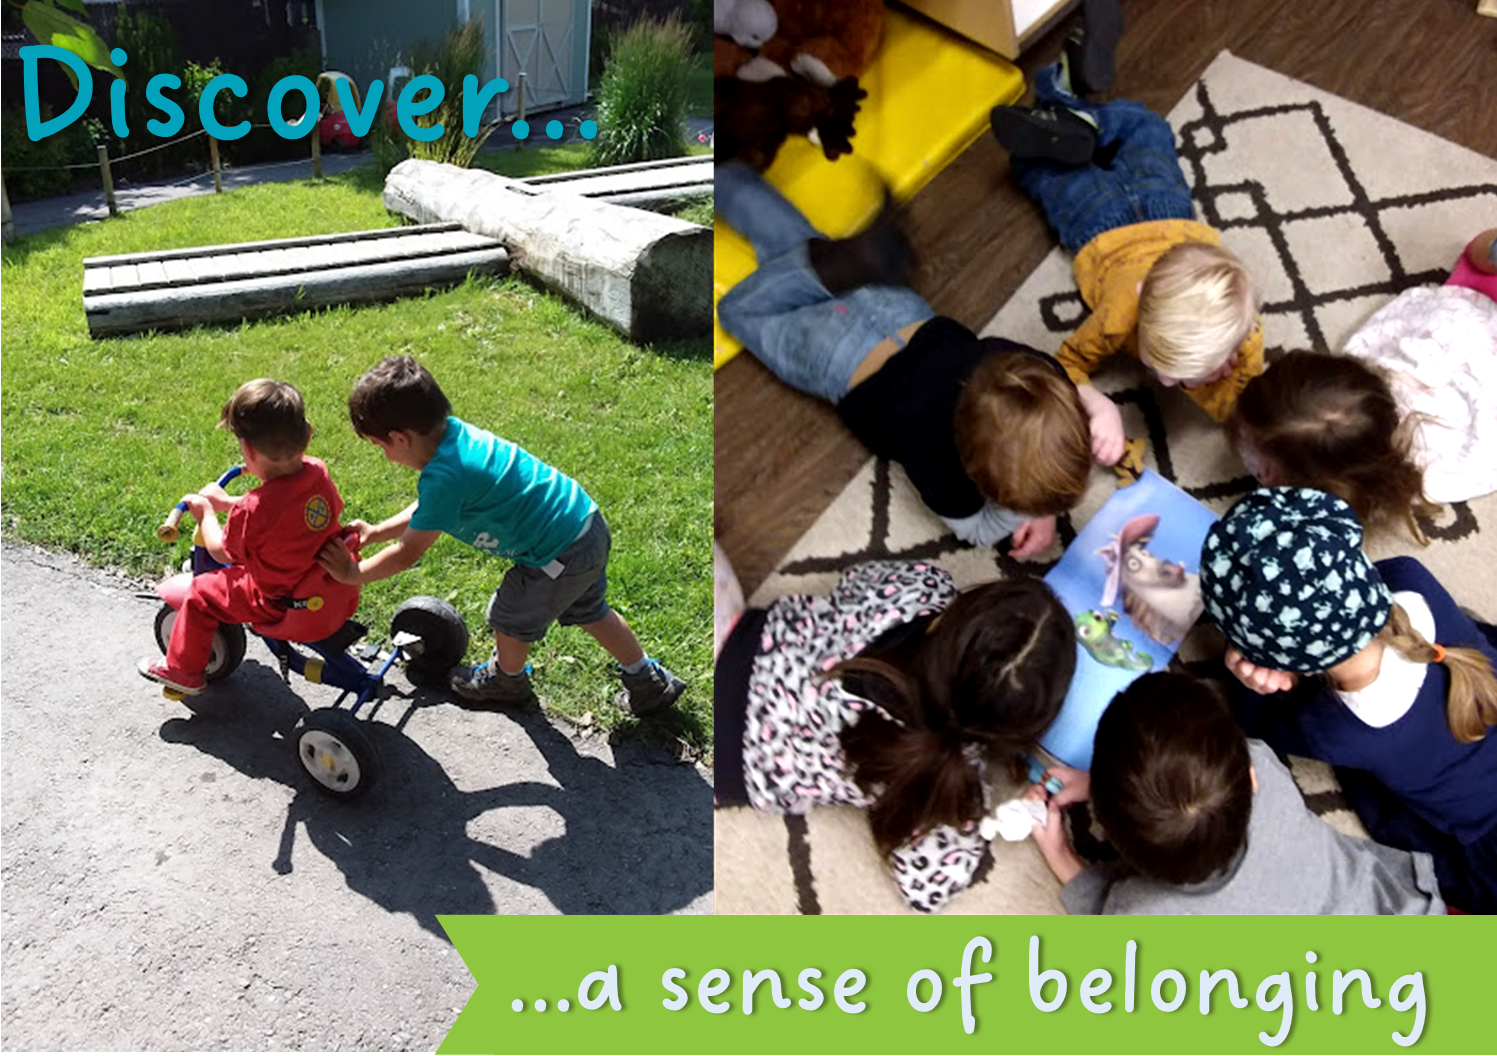 Young boy pushes another boy on a tricycle. Six young children crowd around a picture book. The text reads: "Discover a sense of belonging.: